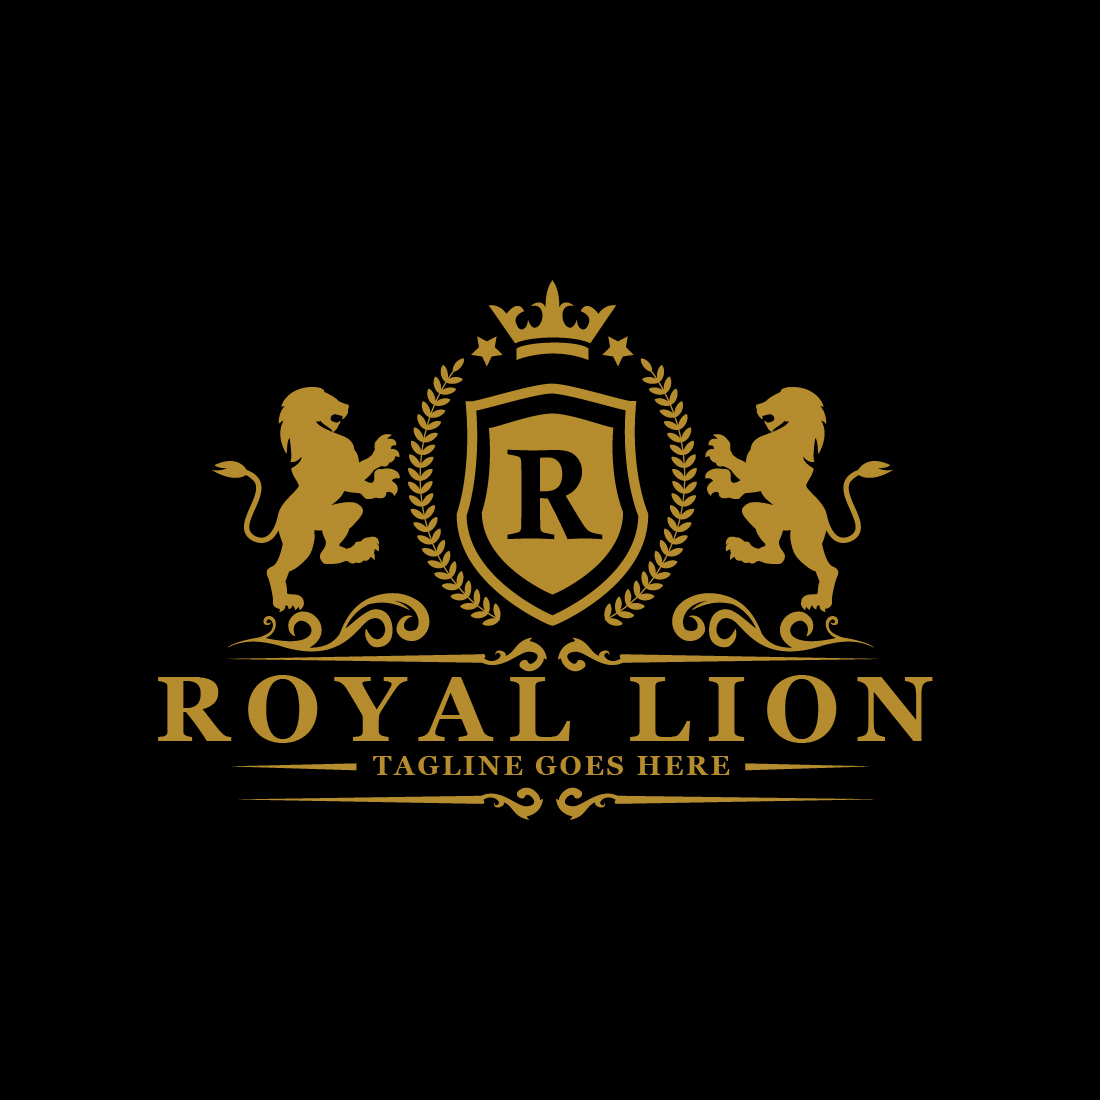 Royal Lion Heraldic Logos only - $ 15 cover image.